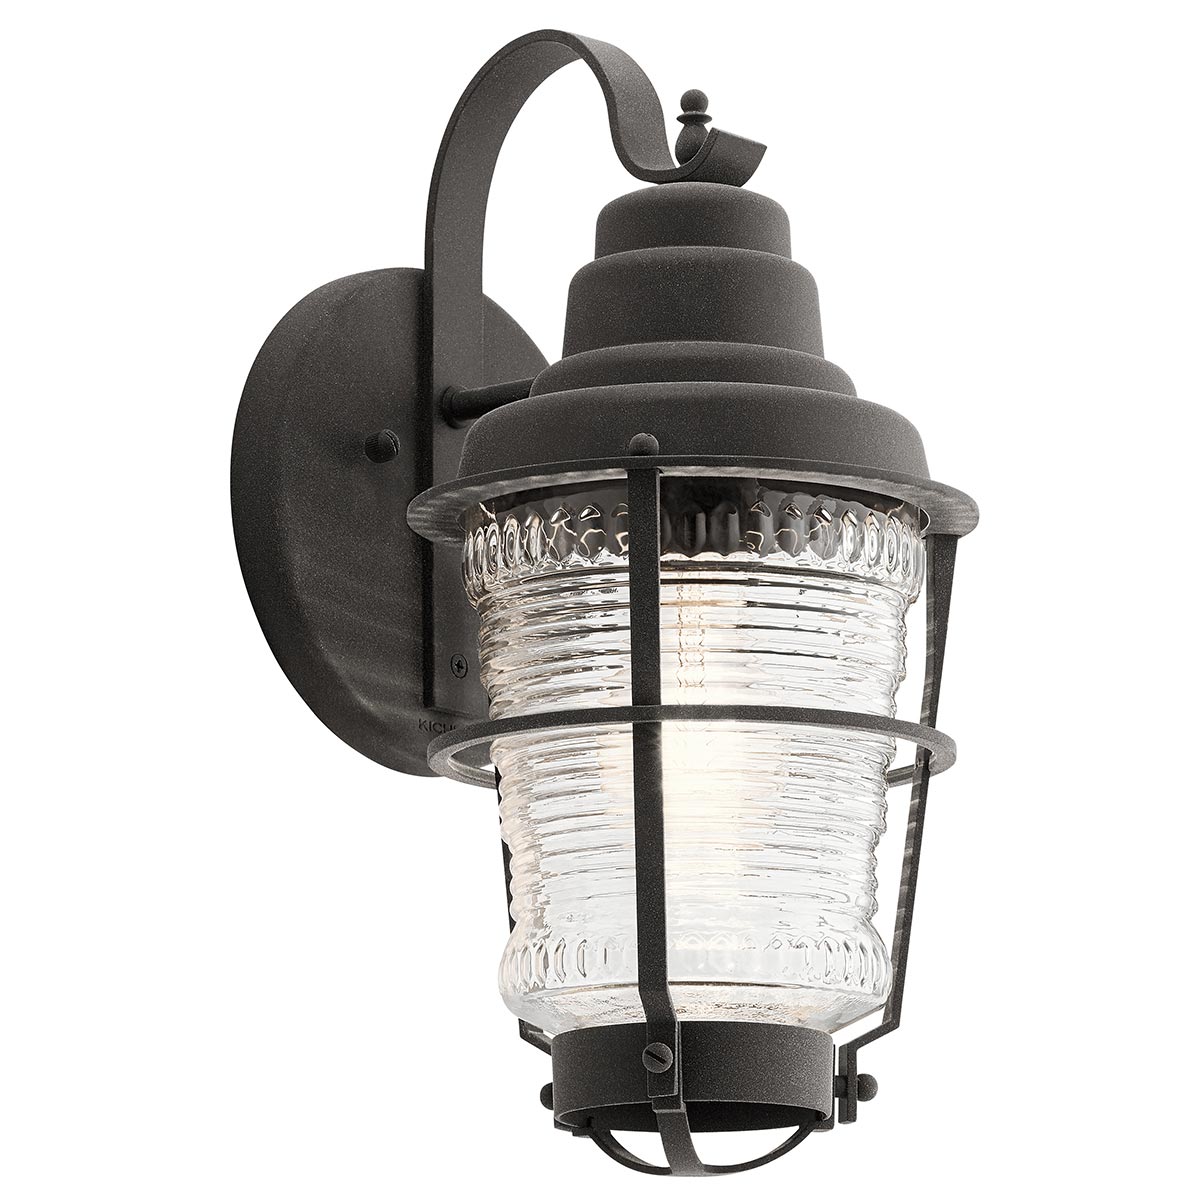 Chance Harbor Small Outdoor Wall Lantern Weathered Zinc Ribbed Glass